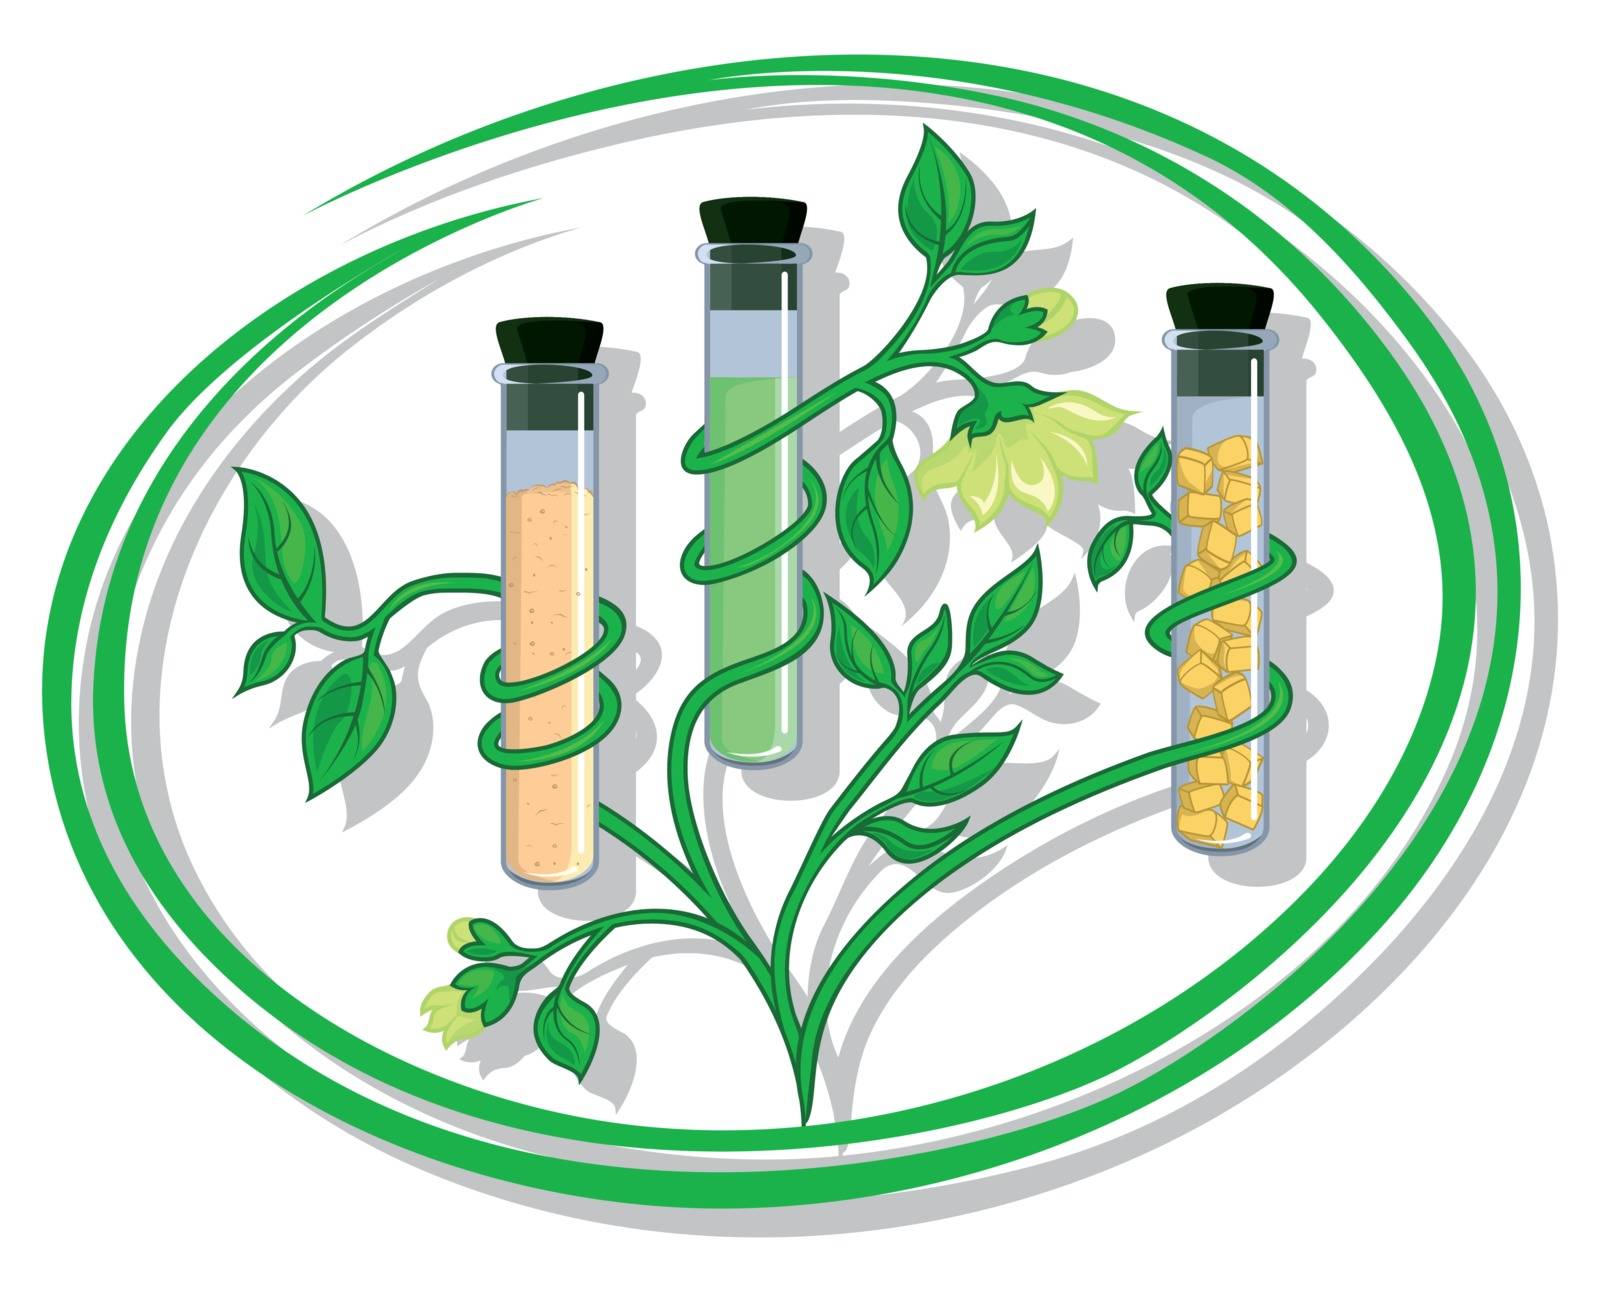 Conceptual illustration depicting the test tube with natural ingredients such as extract, floral wax and herbal powder on the white background